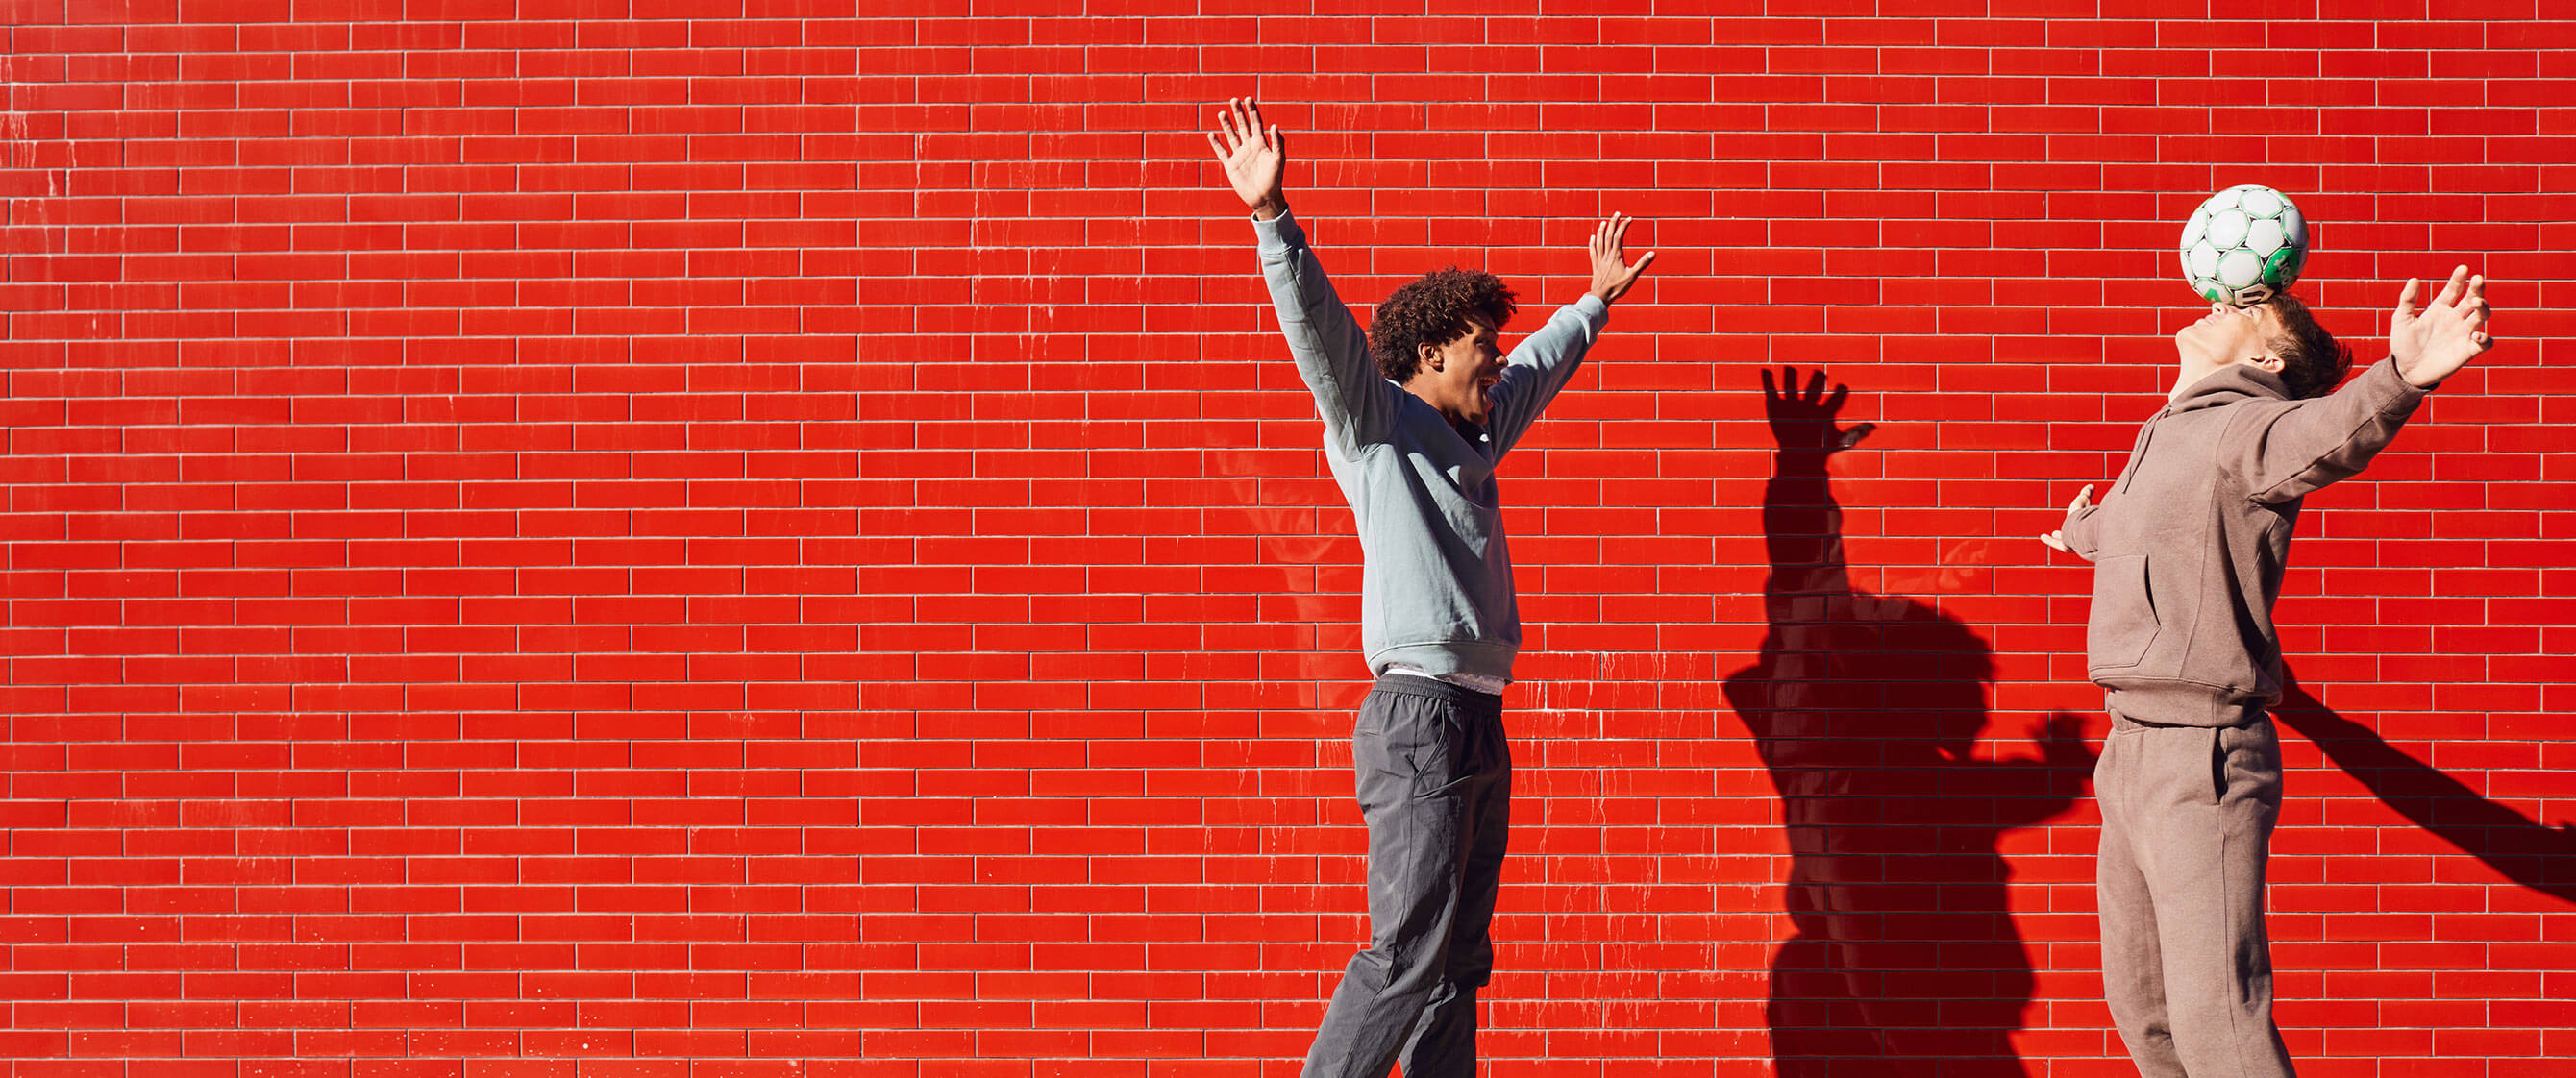 Boy playing soccer in front of a red wall.